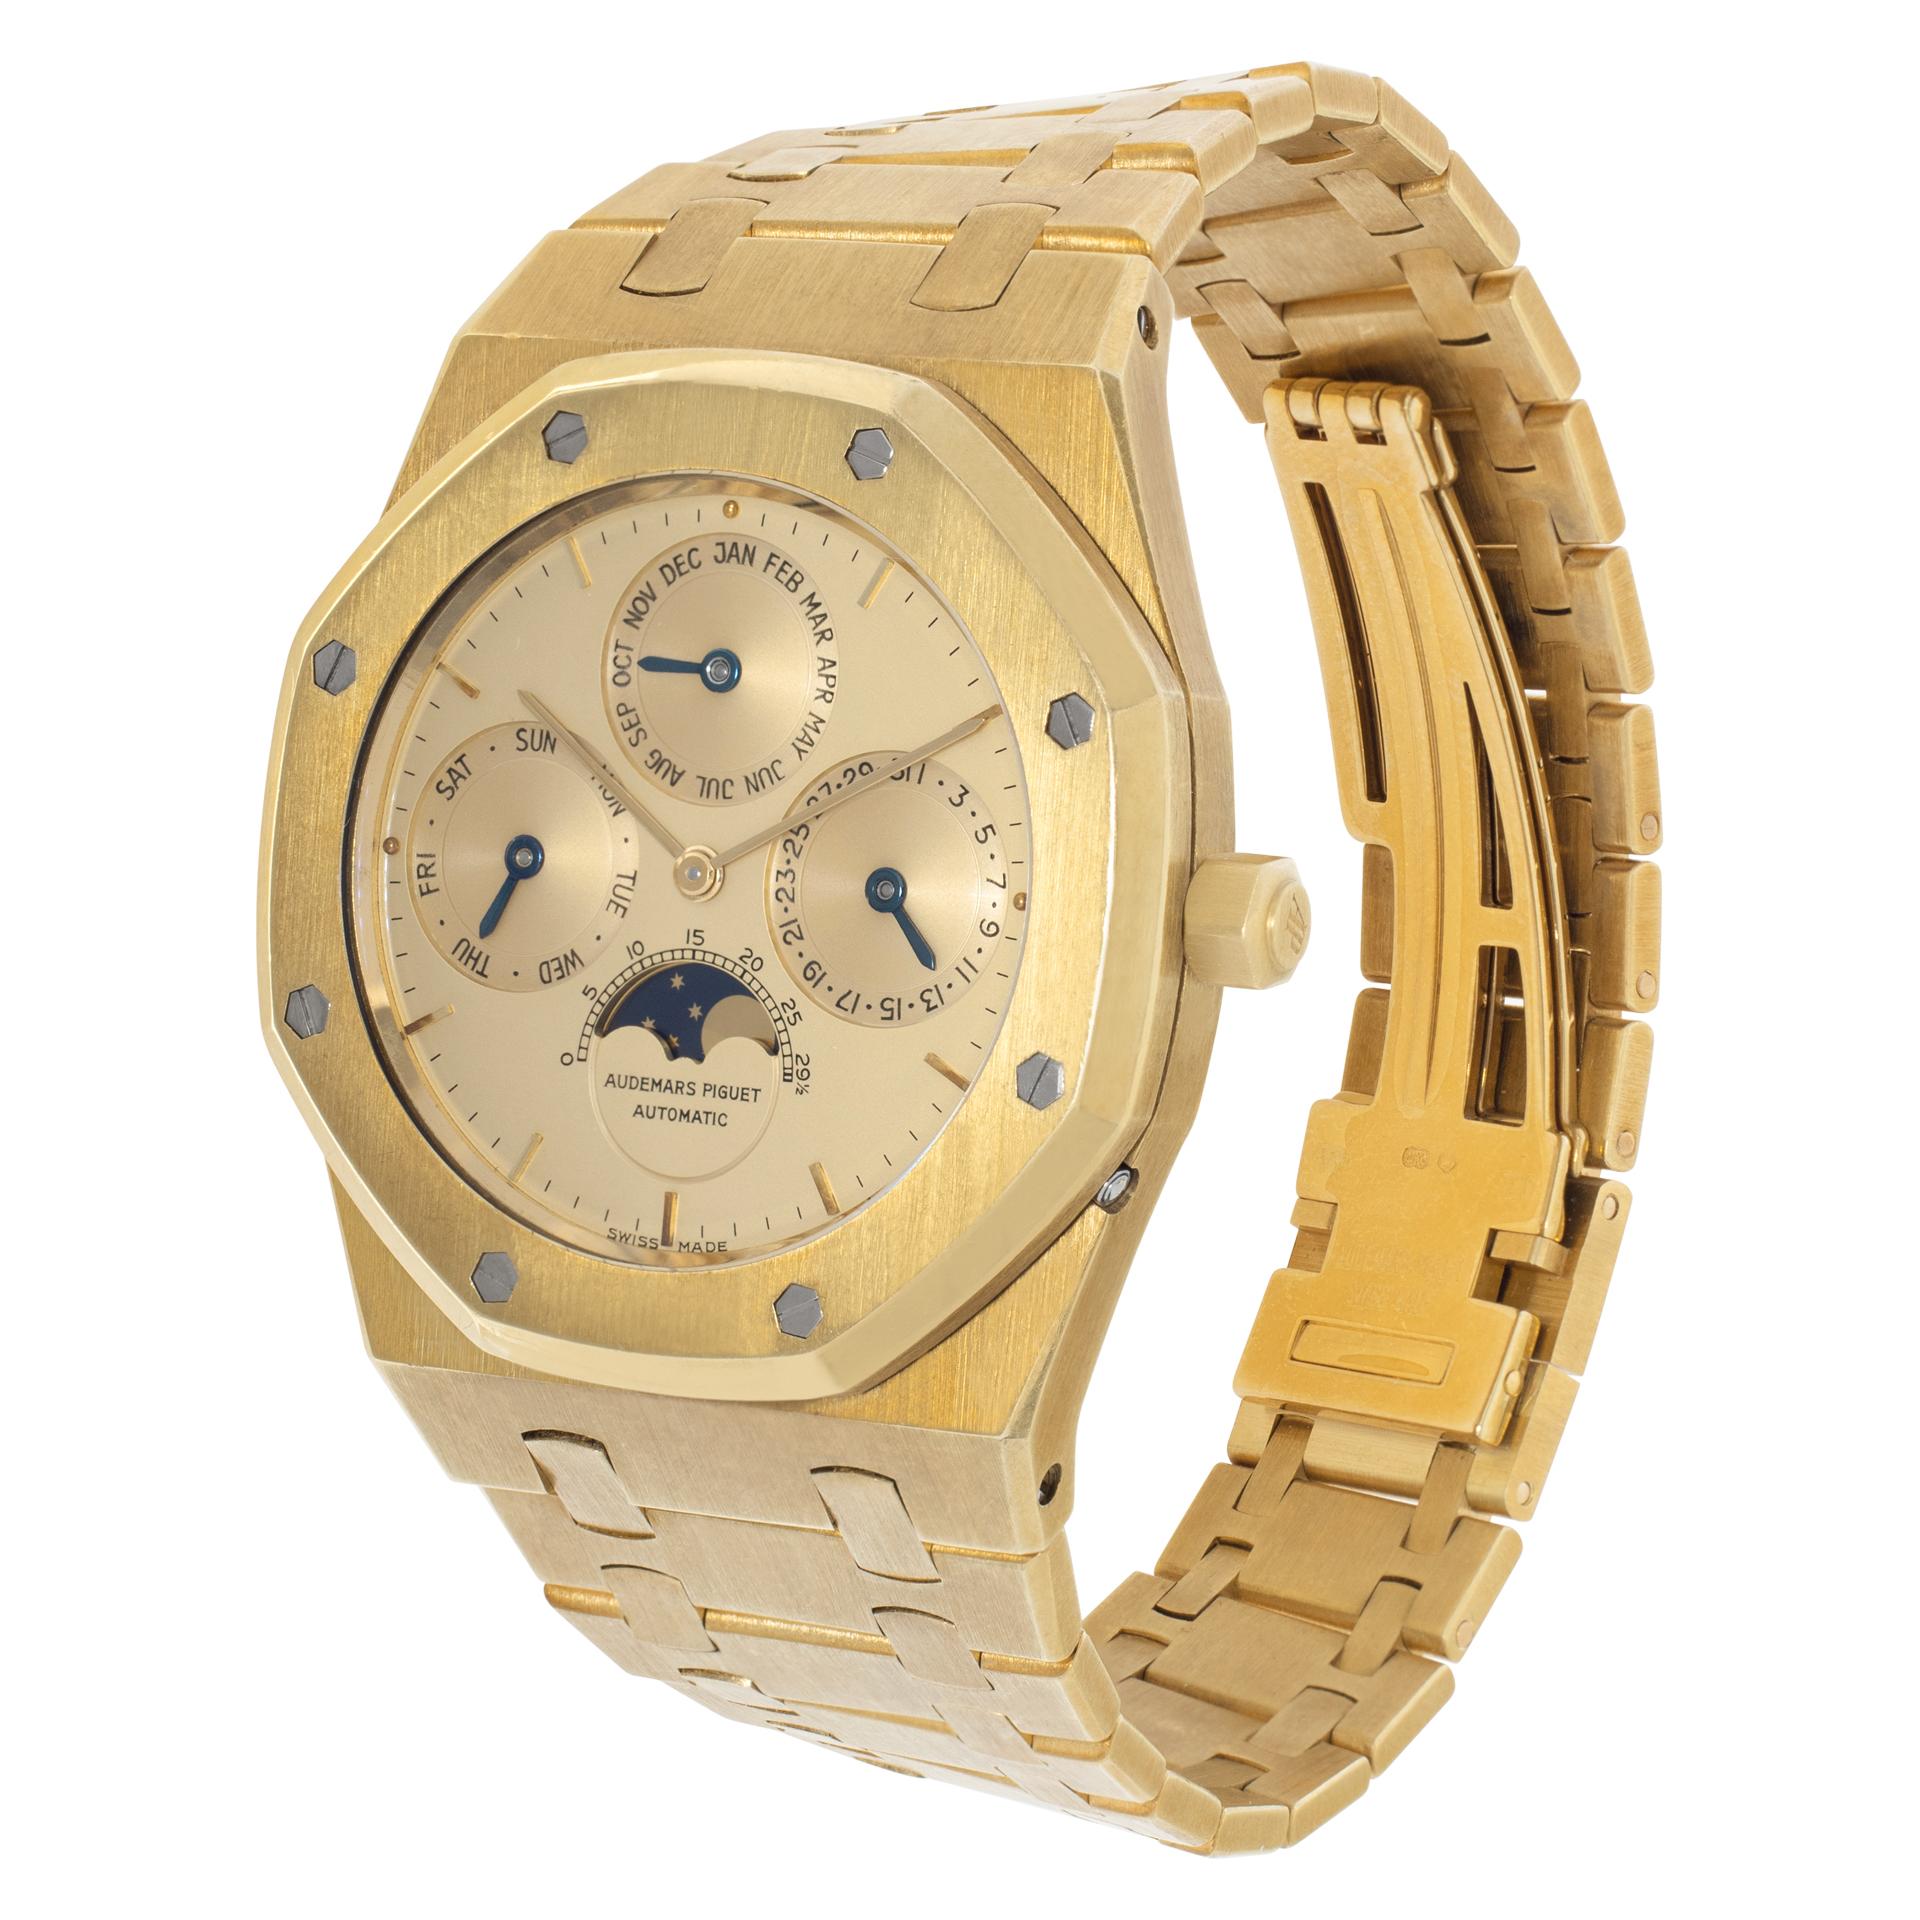 Audemars Piguet Royal Oak Perpetual Calendar in 18k yellow gold. Auto w/ date, day, month and moonphase. 39 mm case size. Ref 25654BA.00.0944BA.01. Recently serviced by AP Switzerland, comes with service box and copy of service papers. Circa